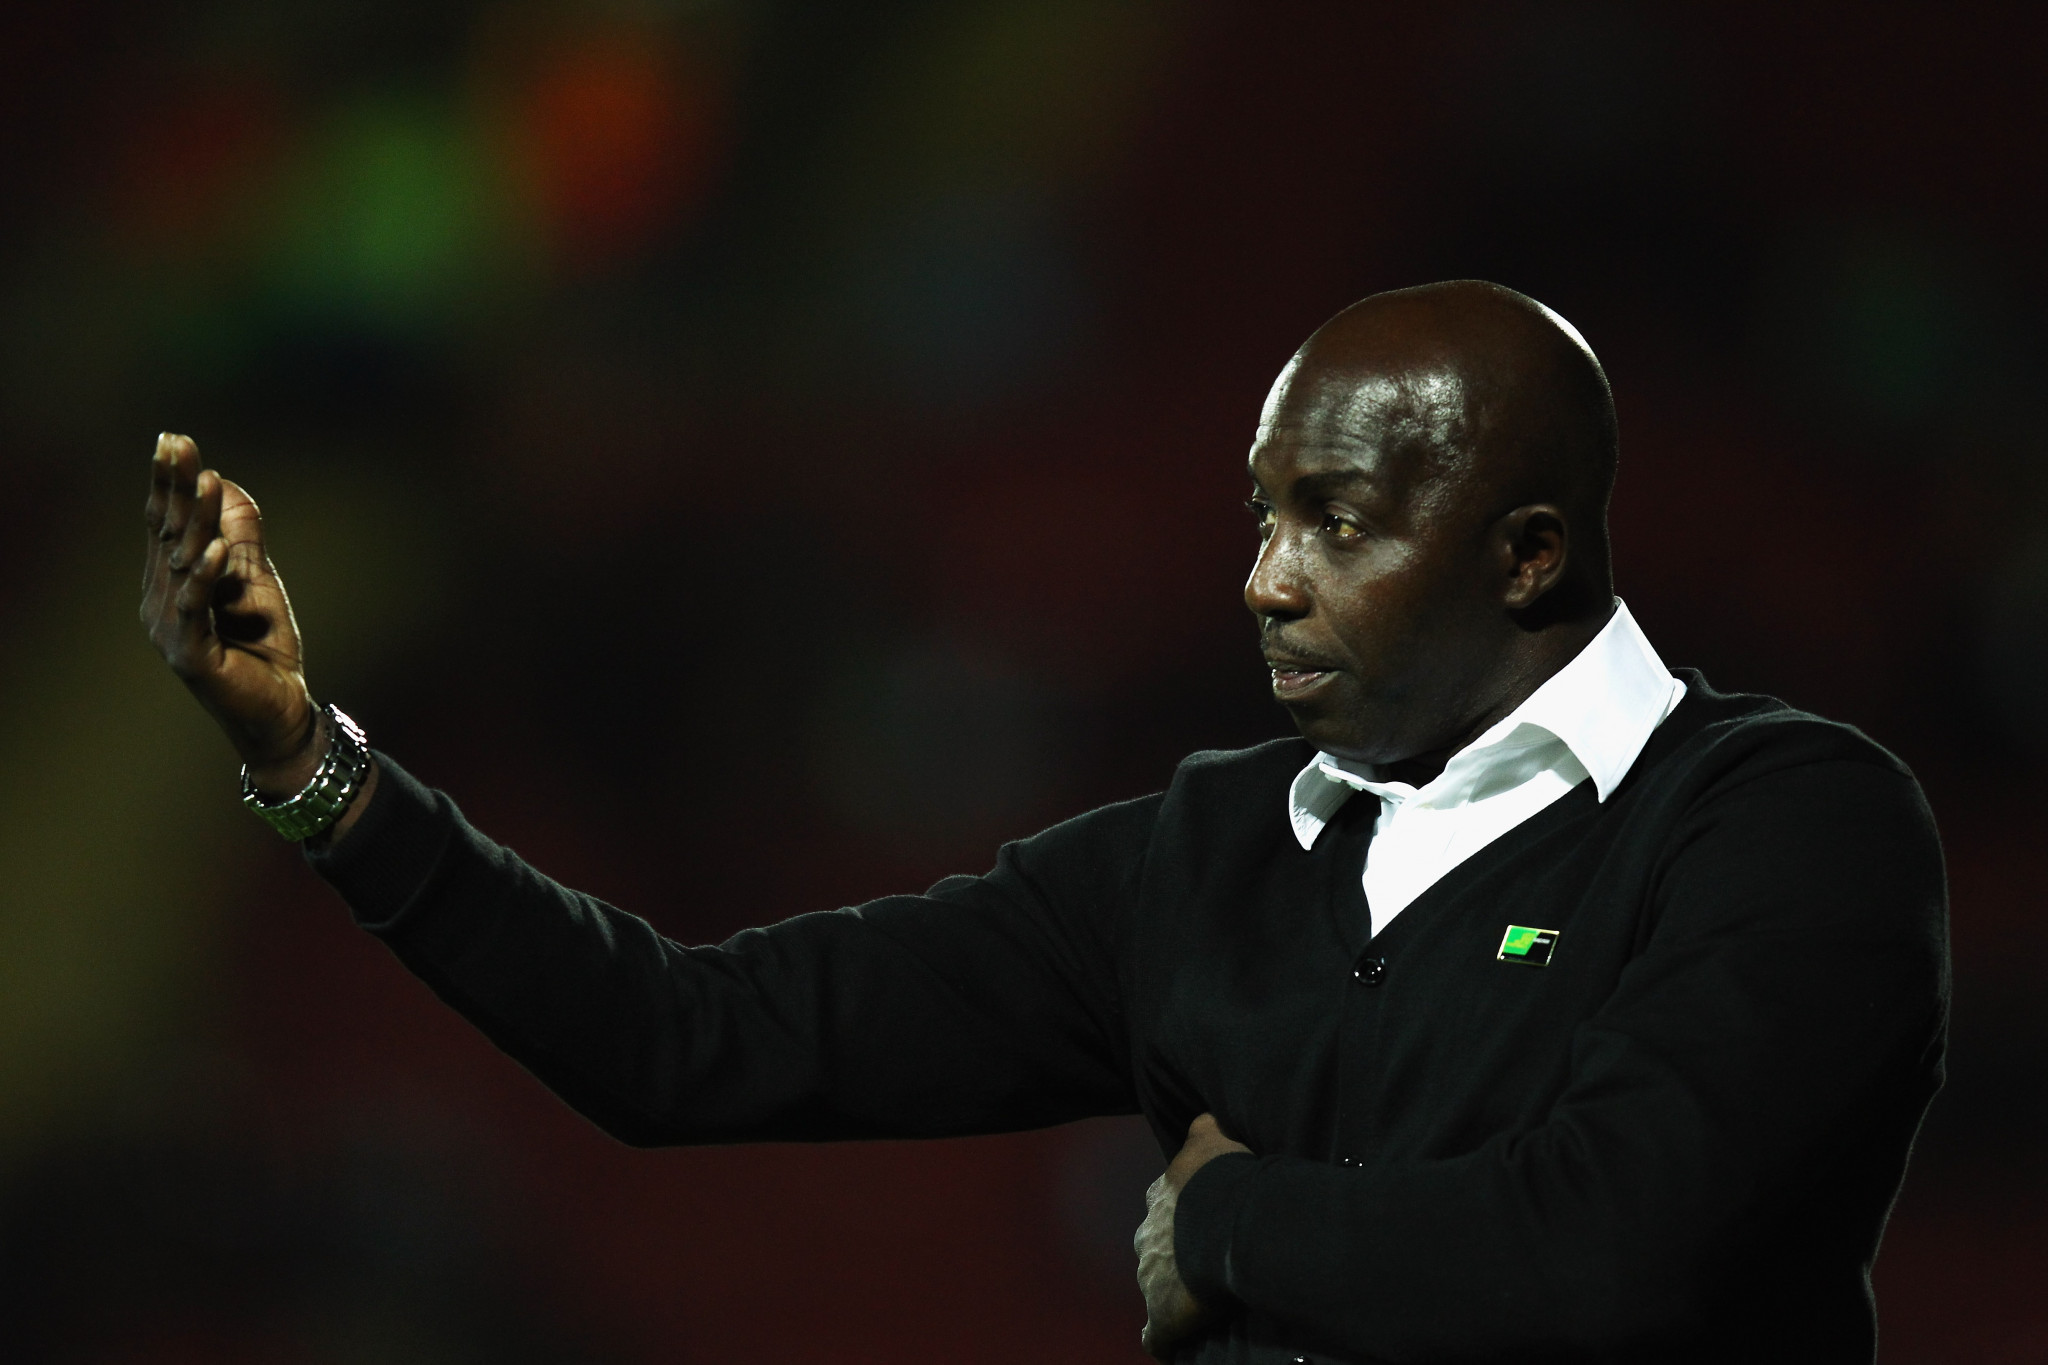 Former Nigeria football coach has life ban for match fixing cut to five years